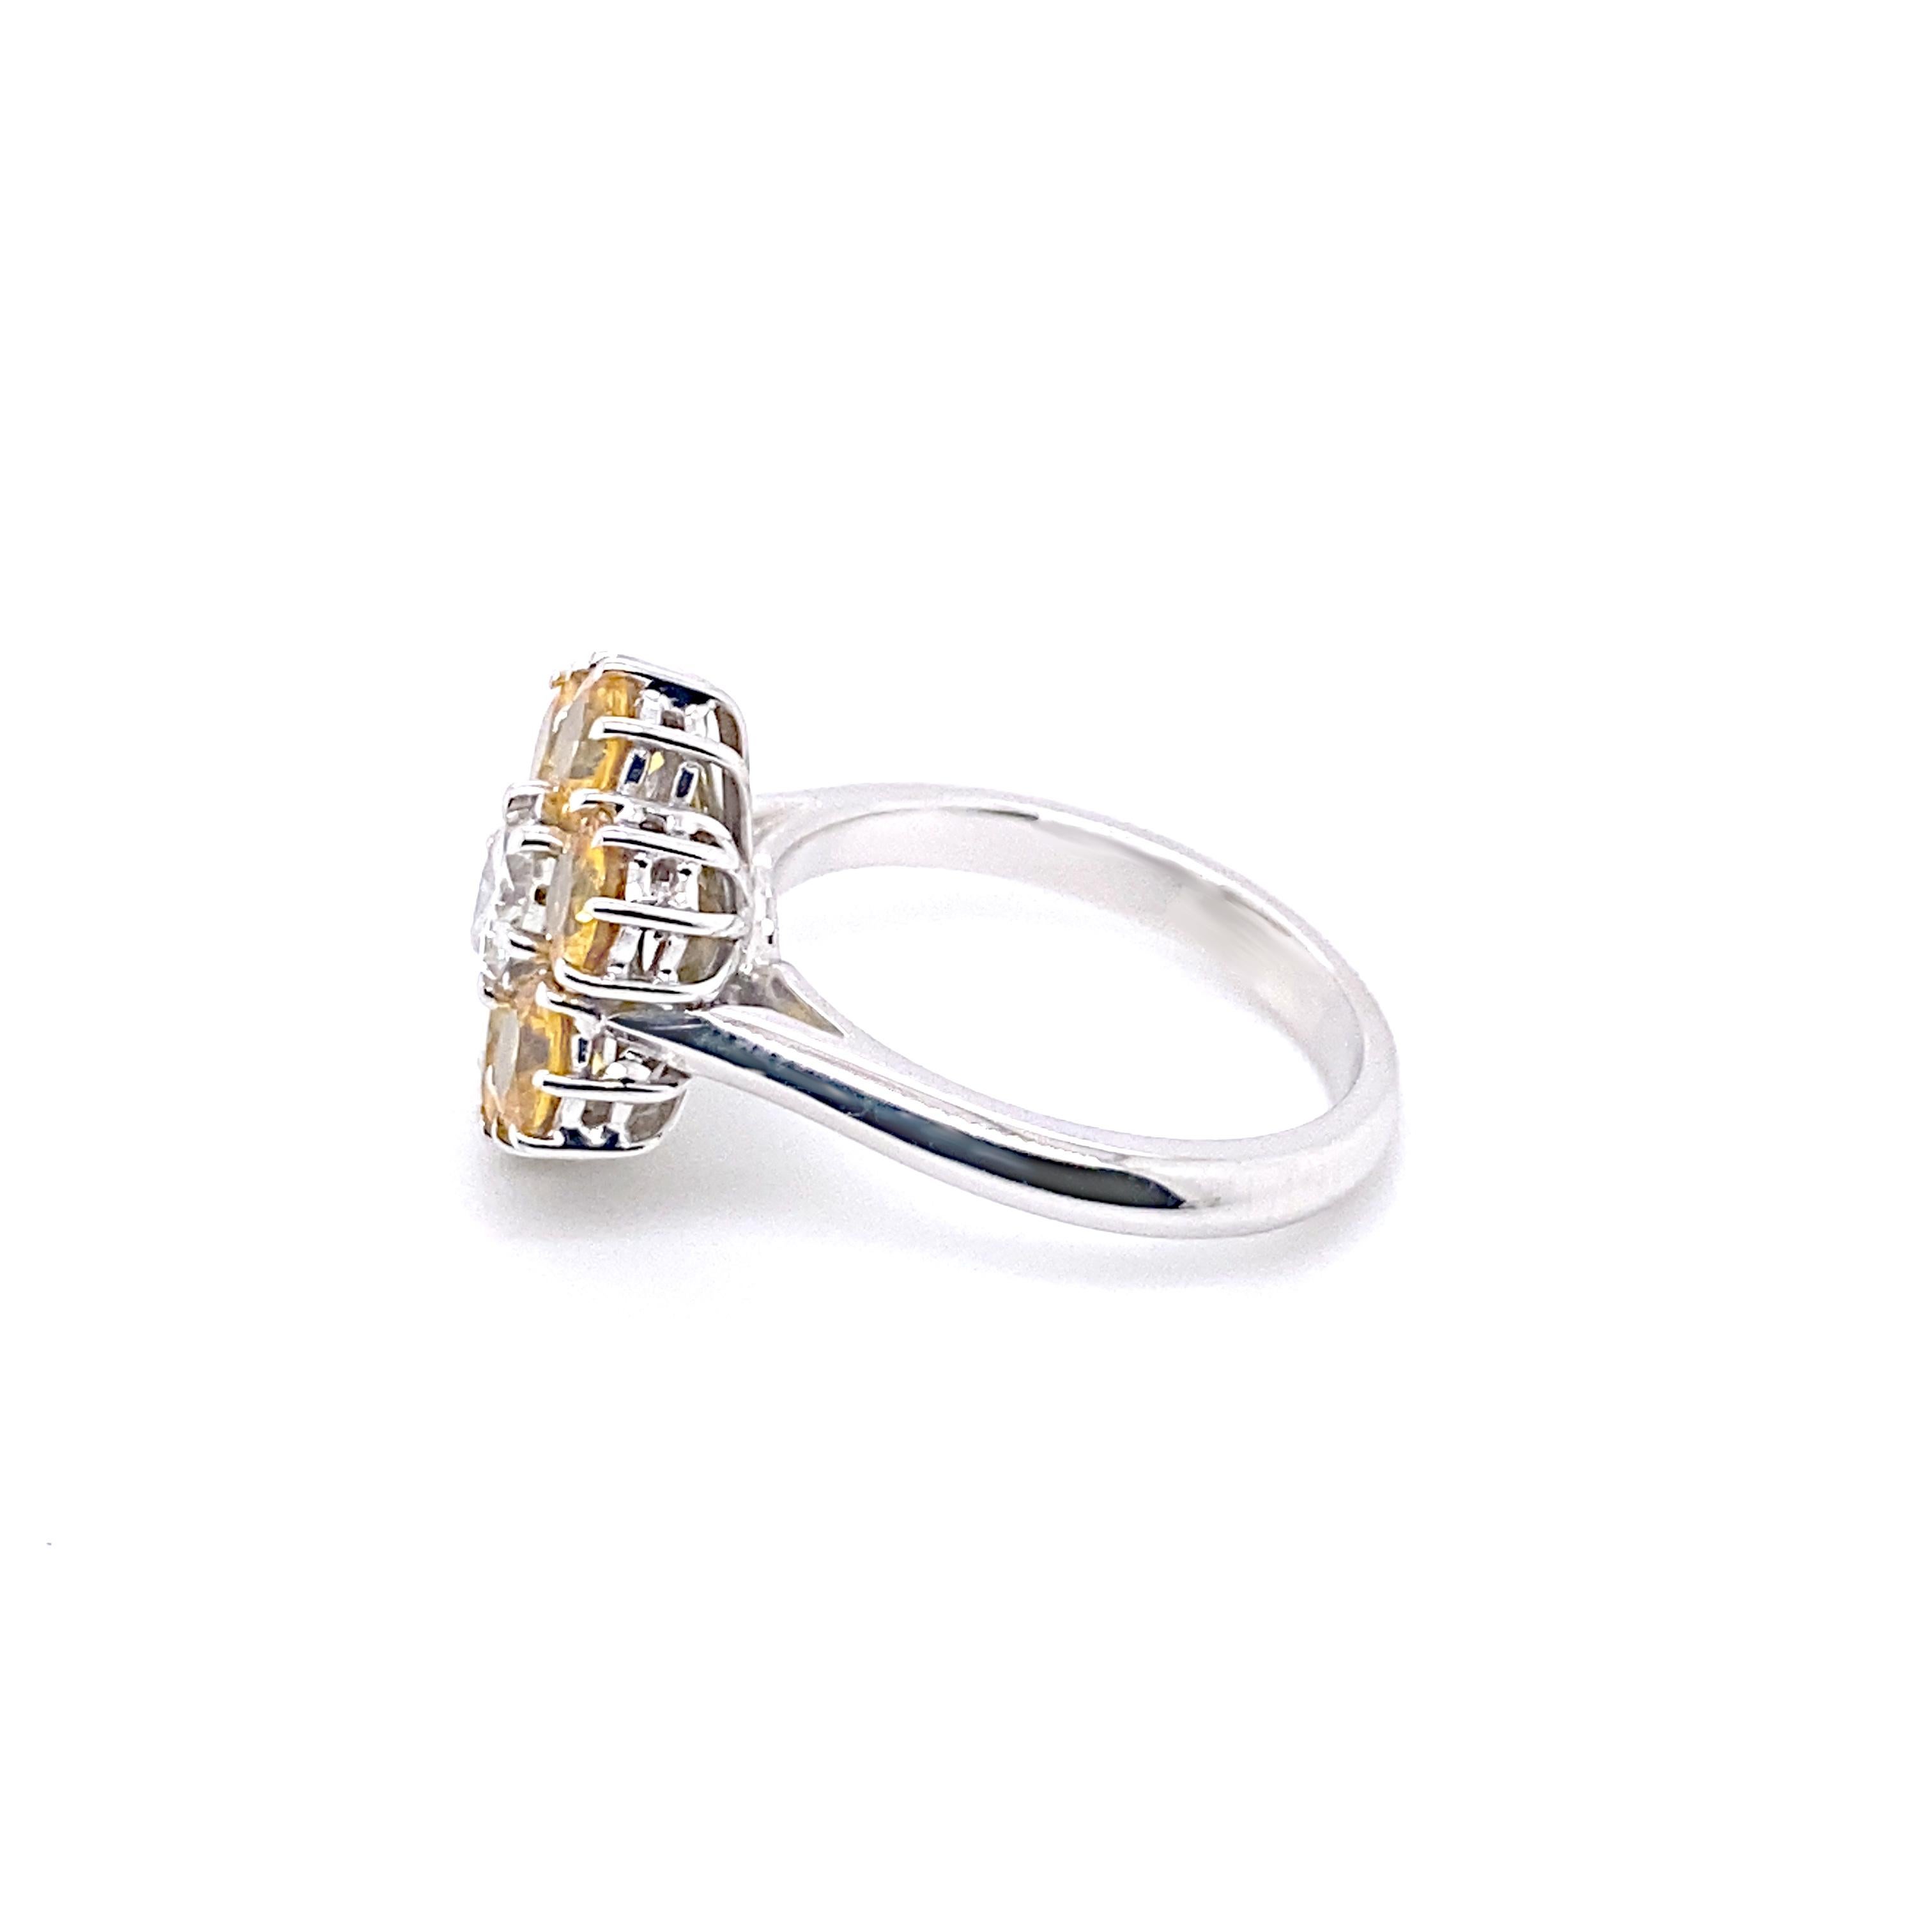 Contemporary 21st Century 18 Karat White Gold, F/G VVS Diamond and Yellow Sapphire Ring For Sale